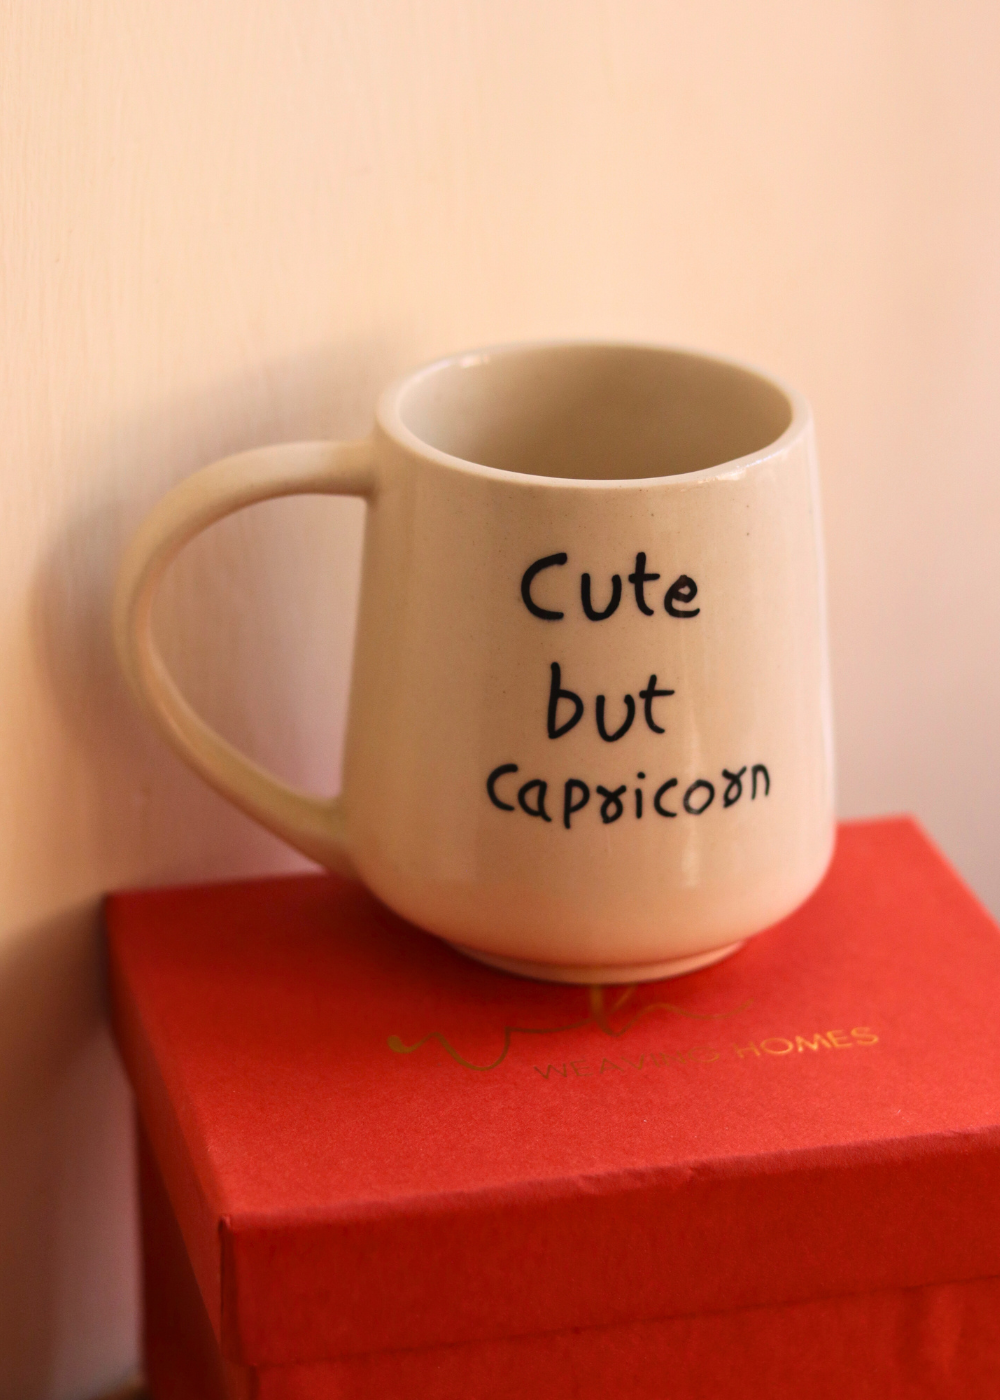 cute but capricorn mug in a gift box with premium quality gifting